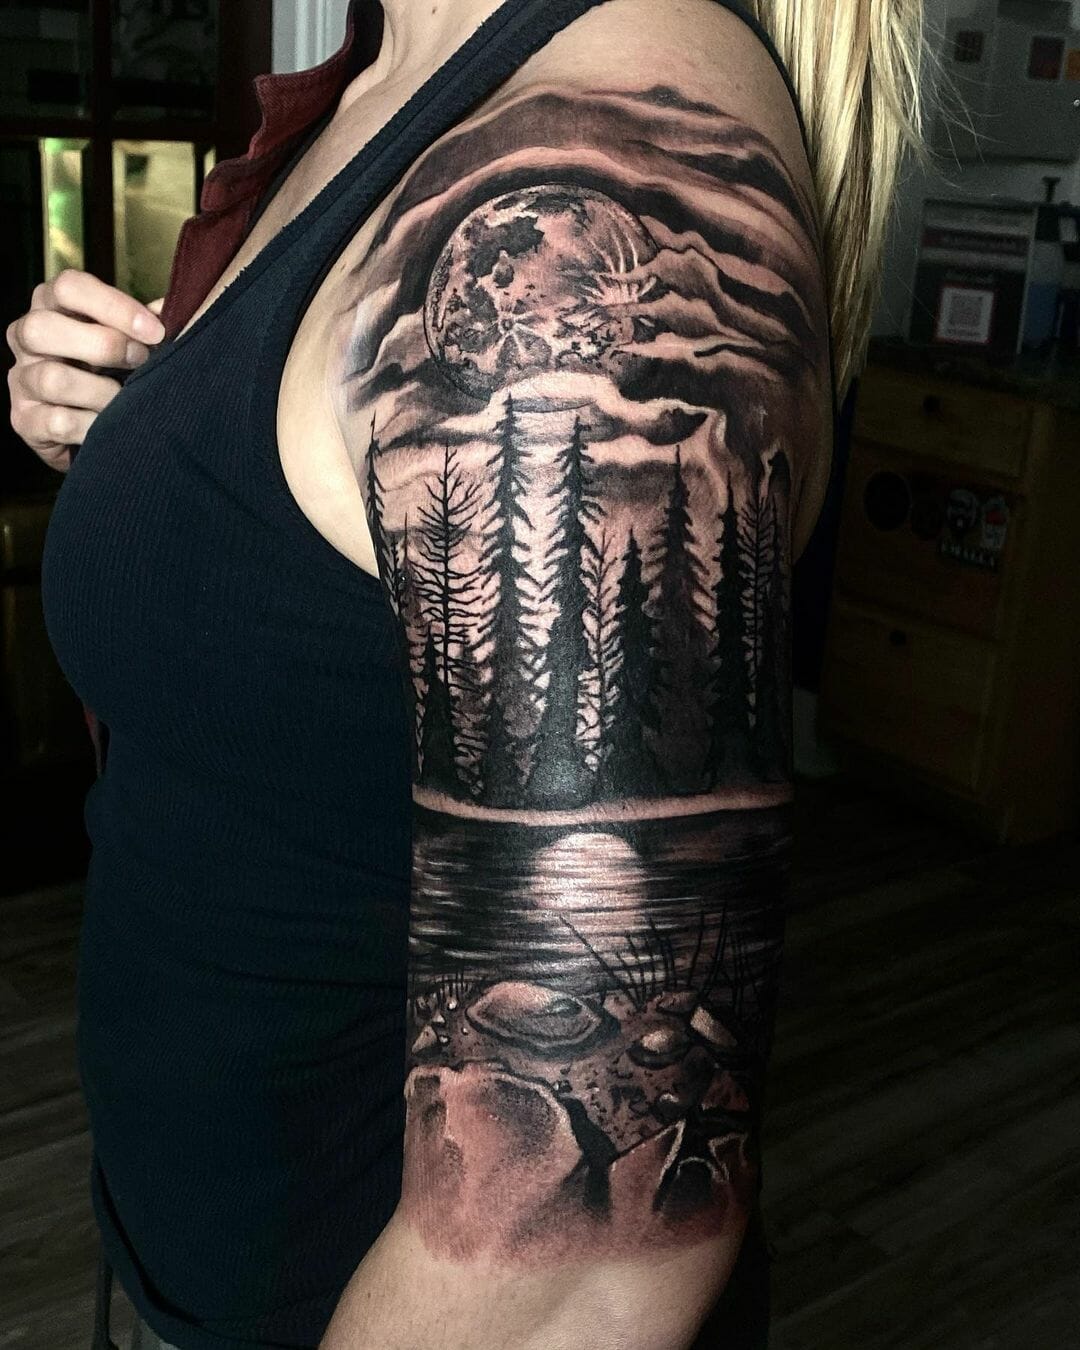 101 Best Forest Sleeve Tattoo Ideas You Have To See To Believe! - Outsons